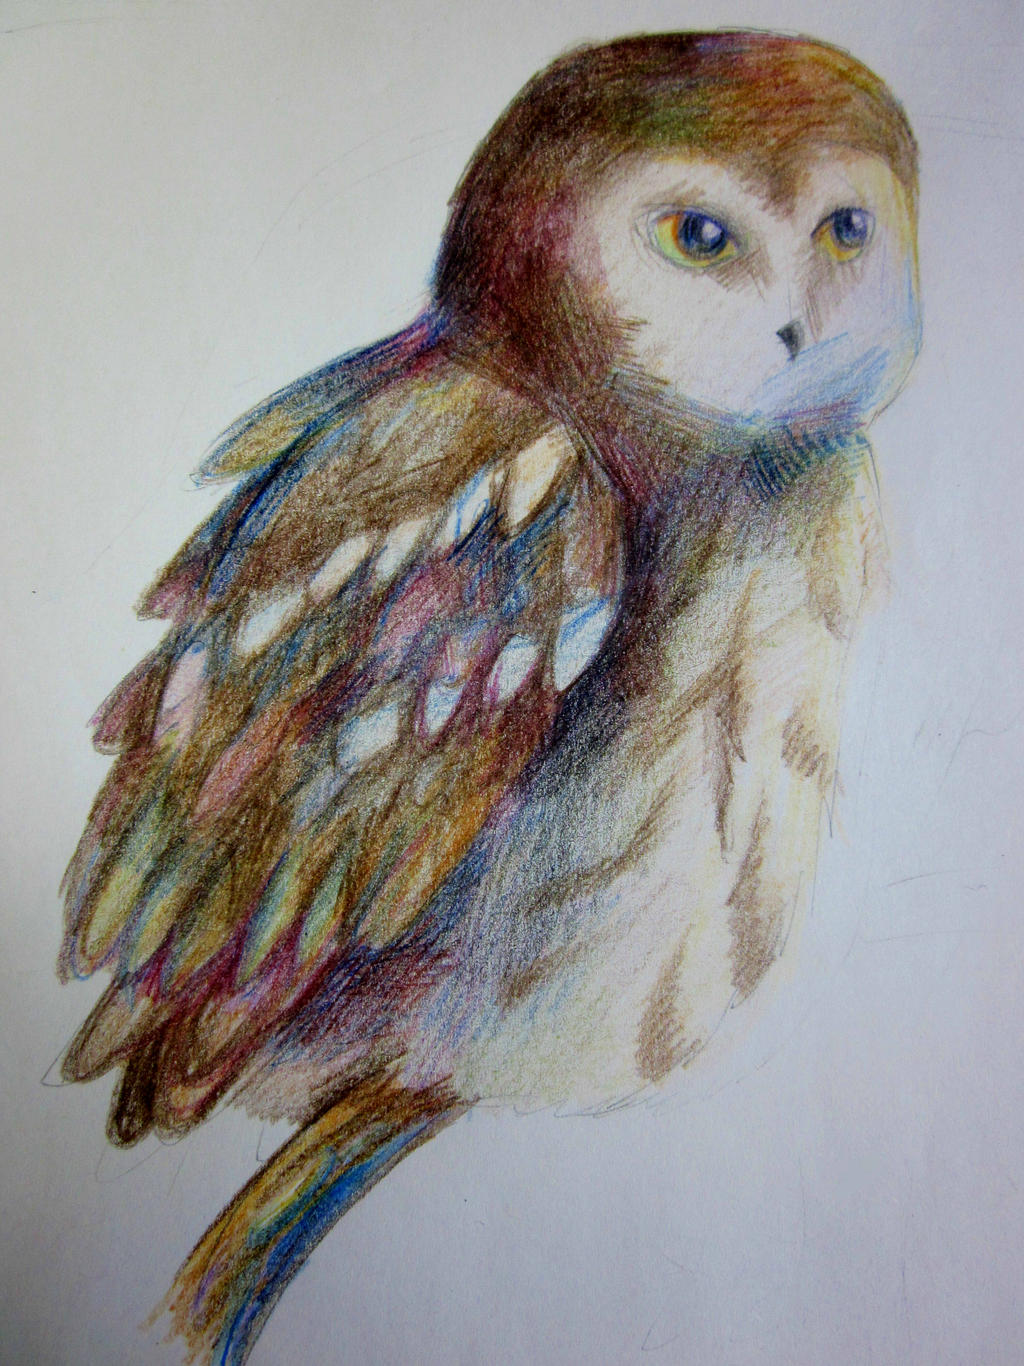 Northern Saw whet Owl